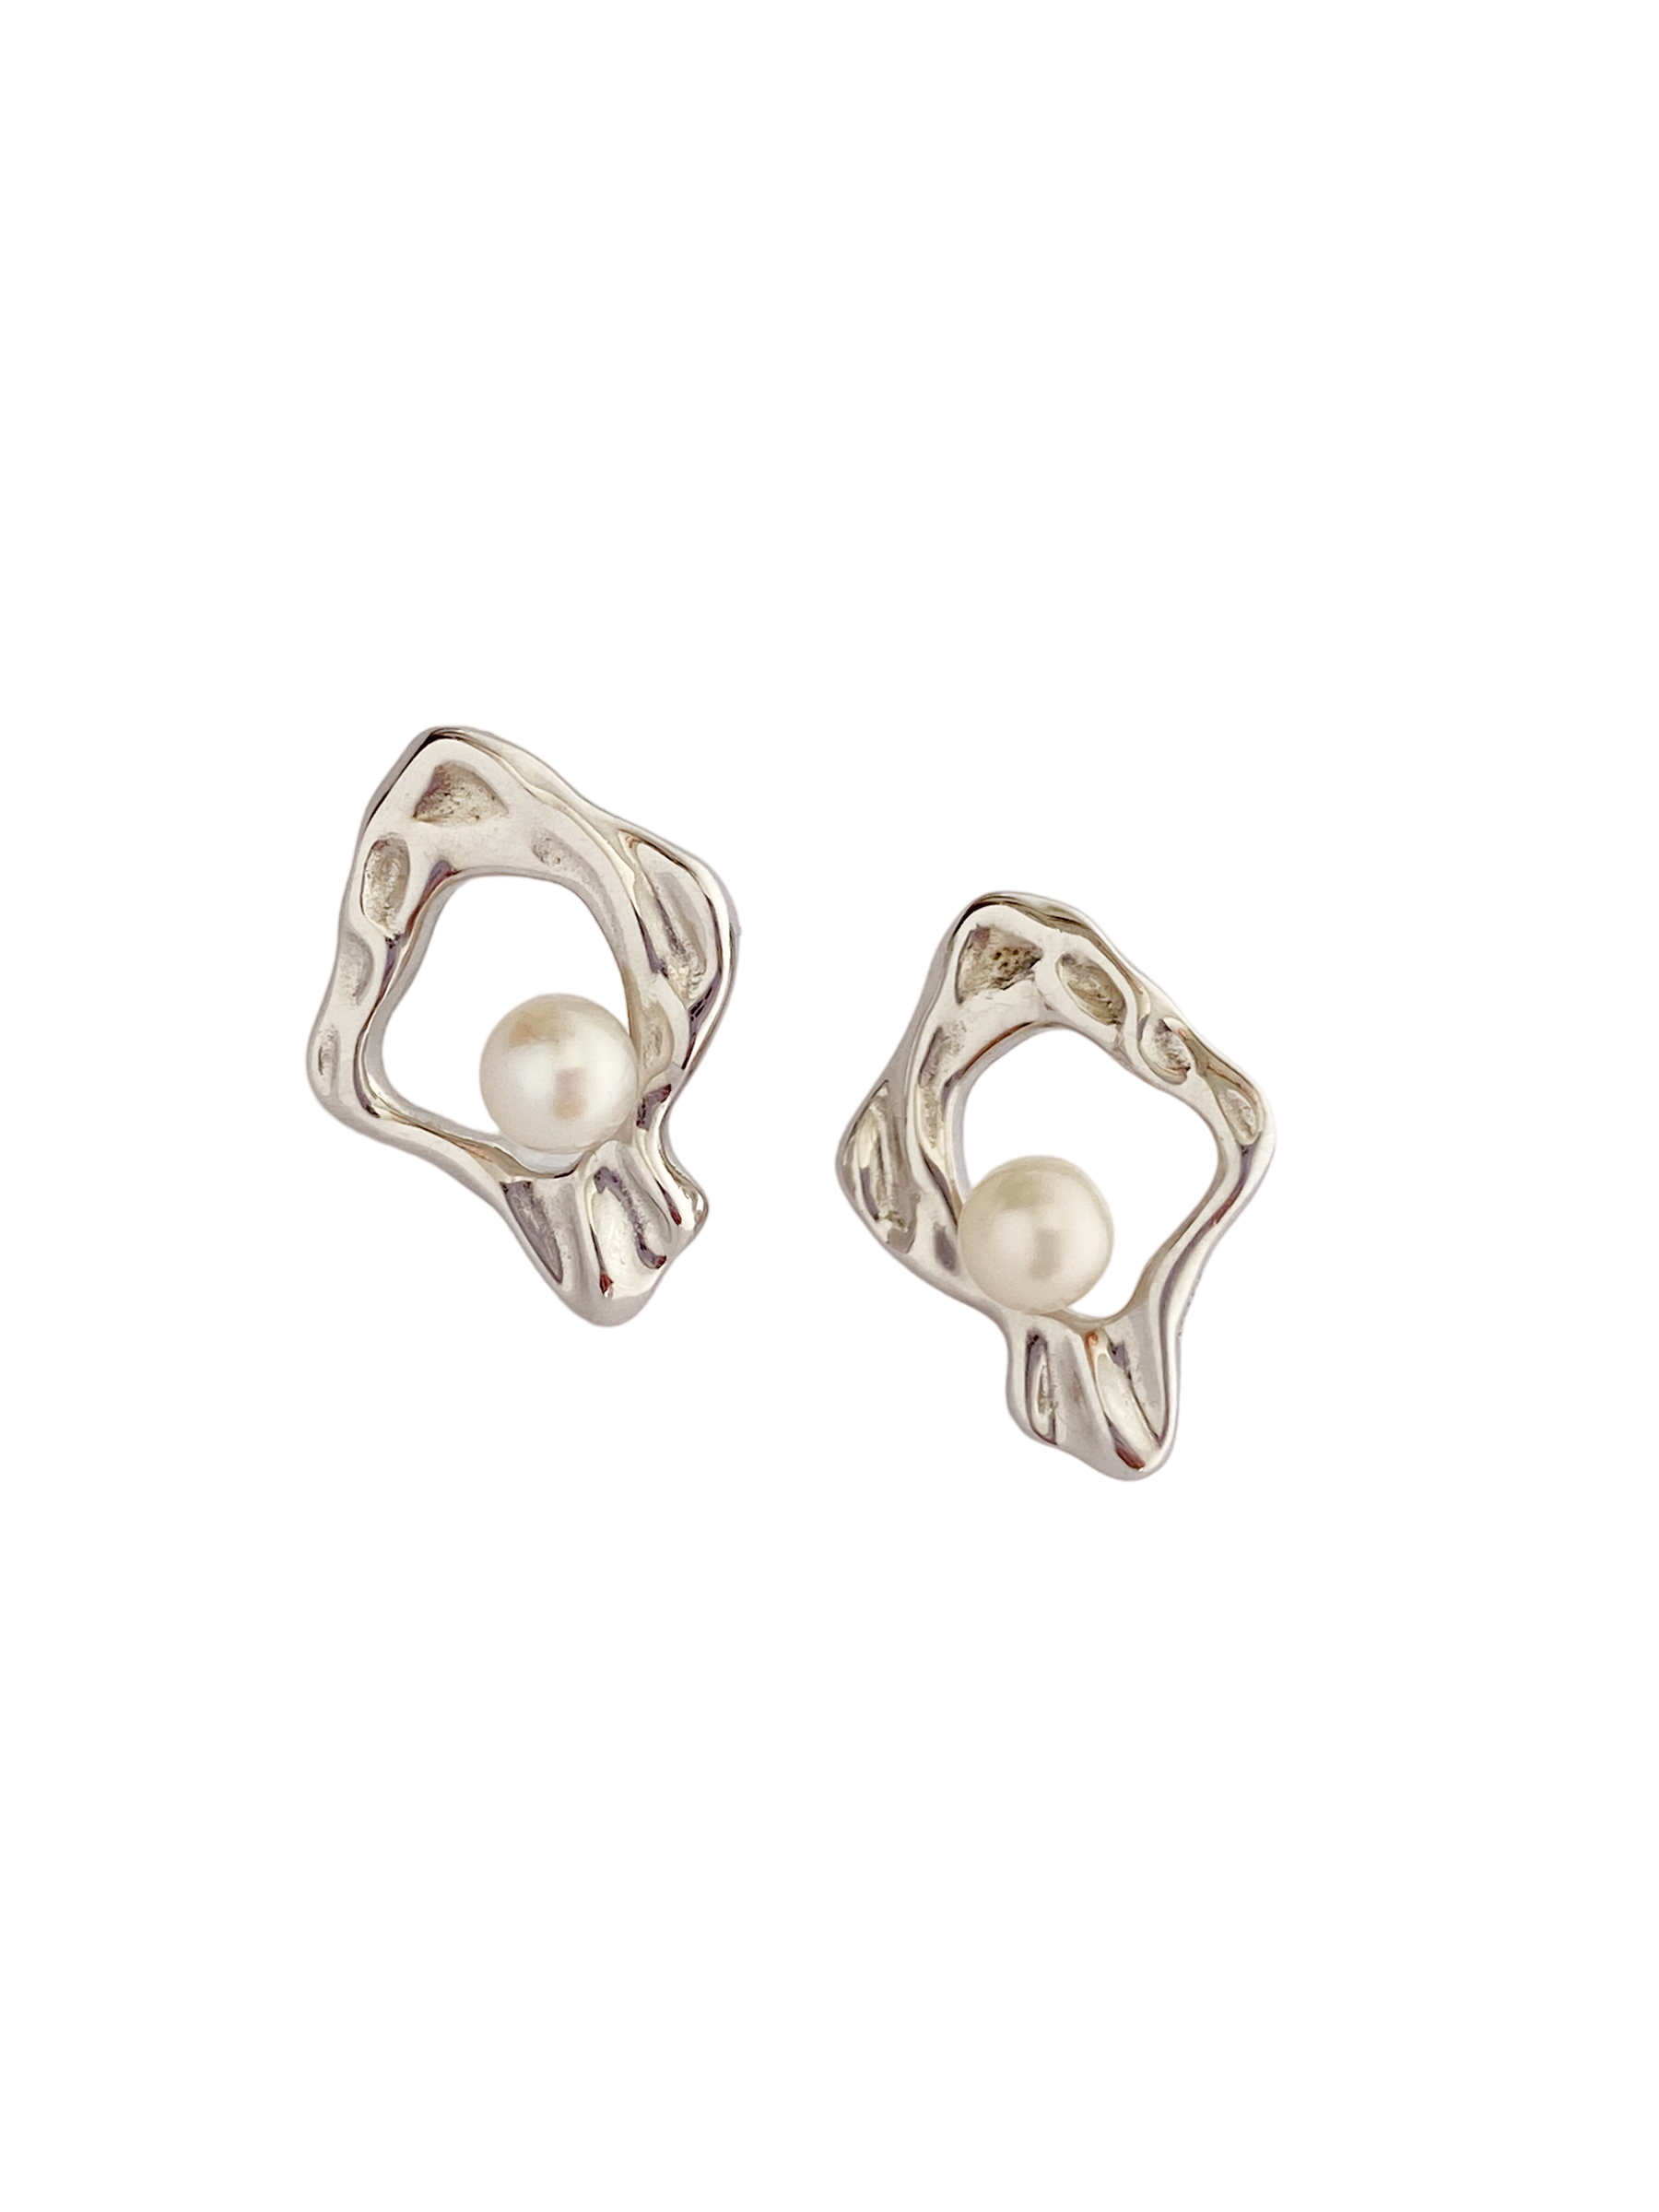 JAMT.B Miro Studs with Freshwater Pearl 